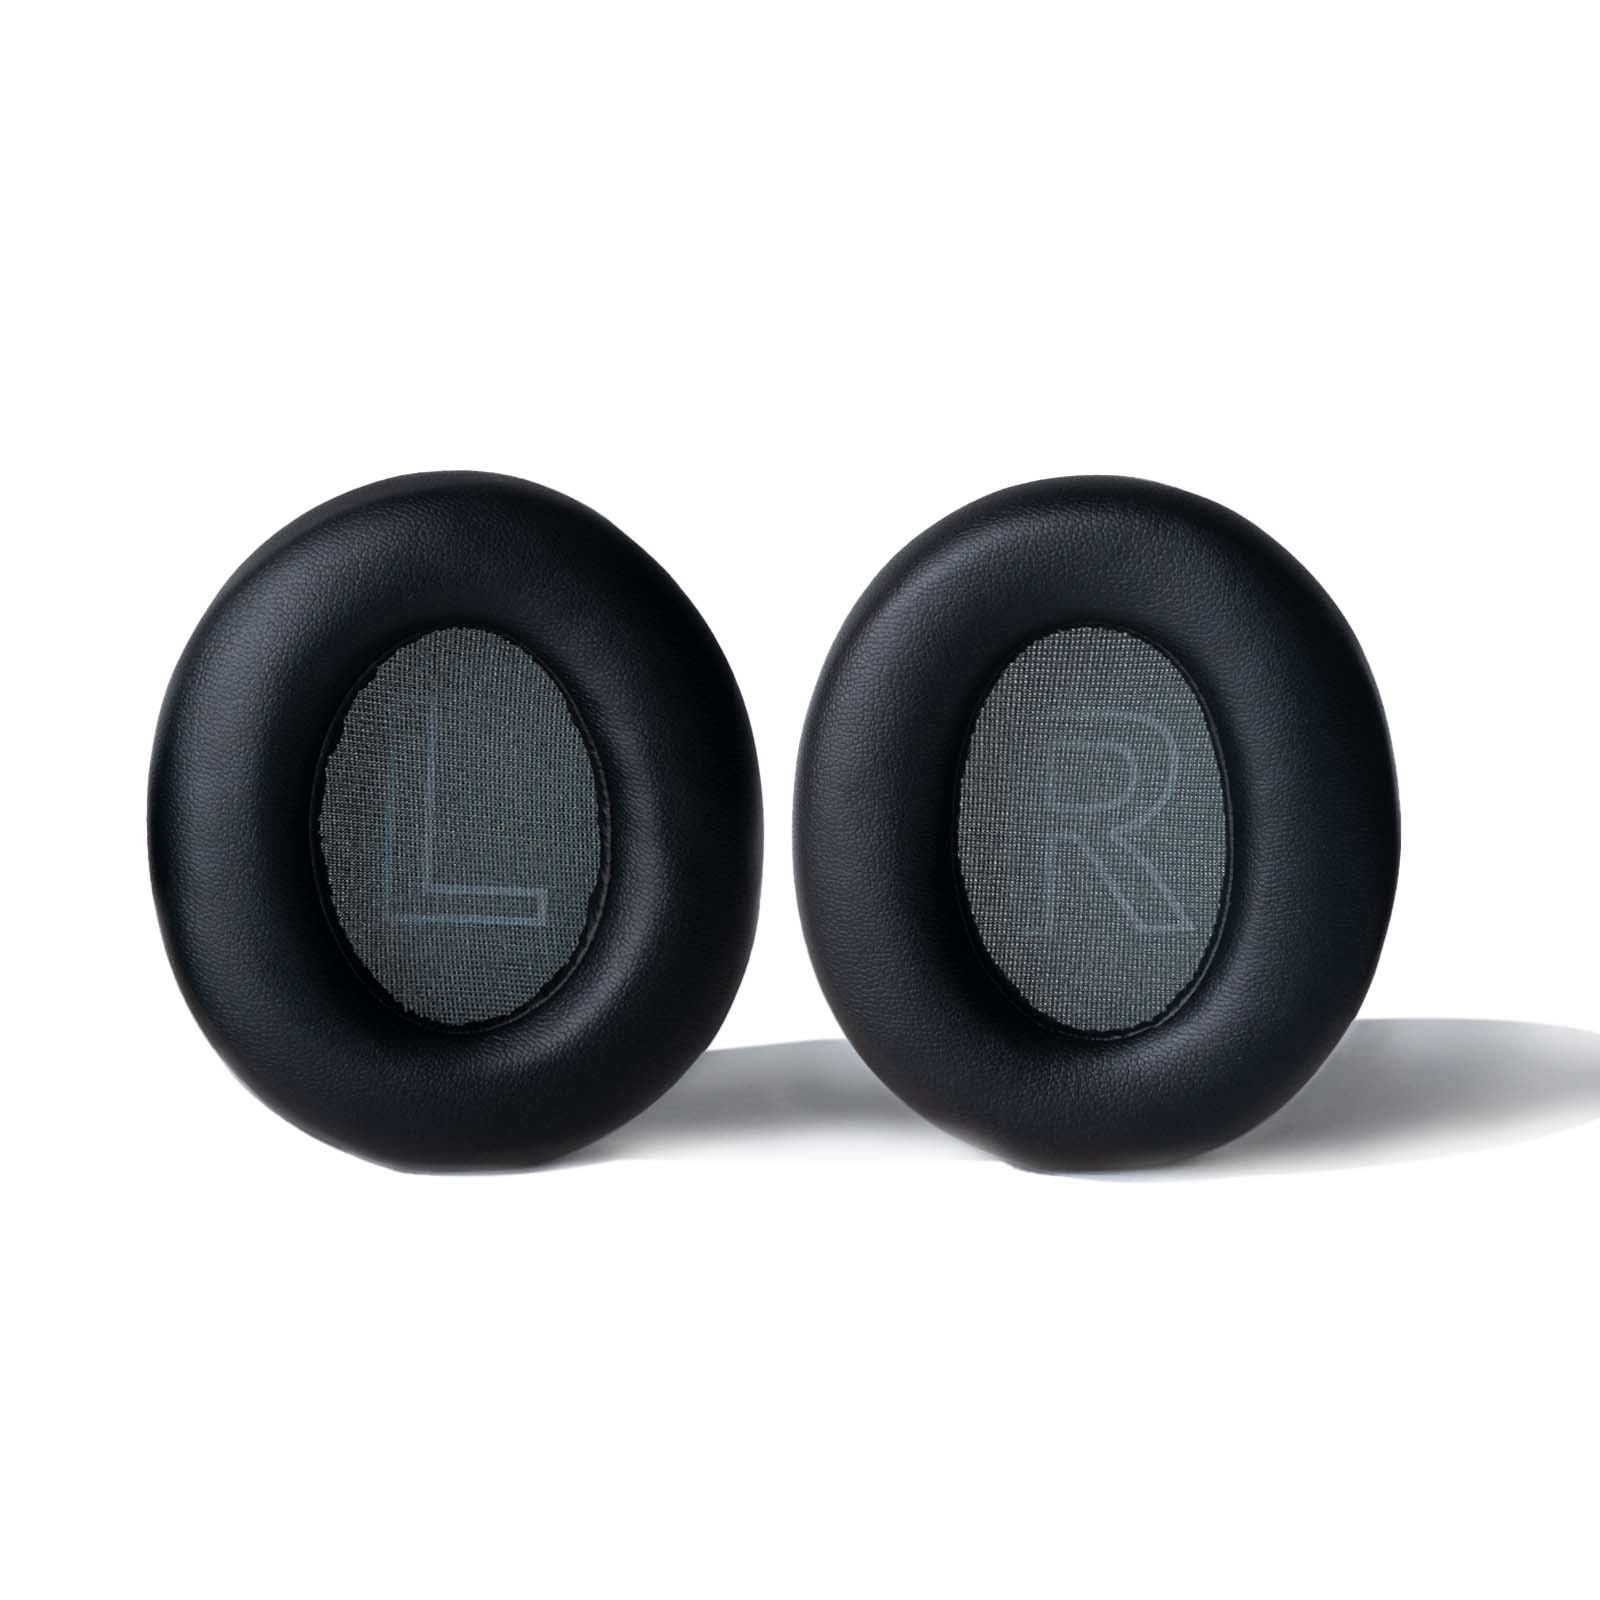  Sodorous Life Q30 Ear Pads Replacement Ear Cushion Foam Softer  Protein Leather Earpads Compatible with Anker Soundcore Life Q30 / Q30 BT  Headphones, Softer Leather Foam : Electronics